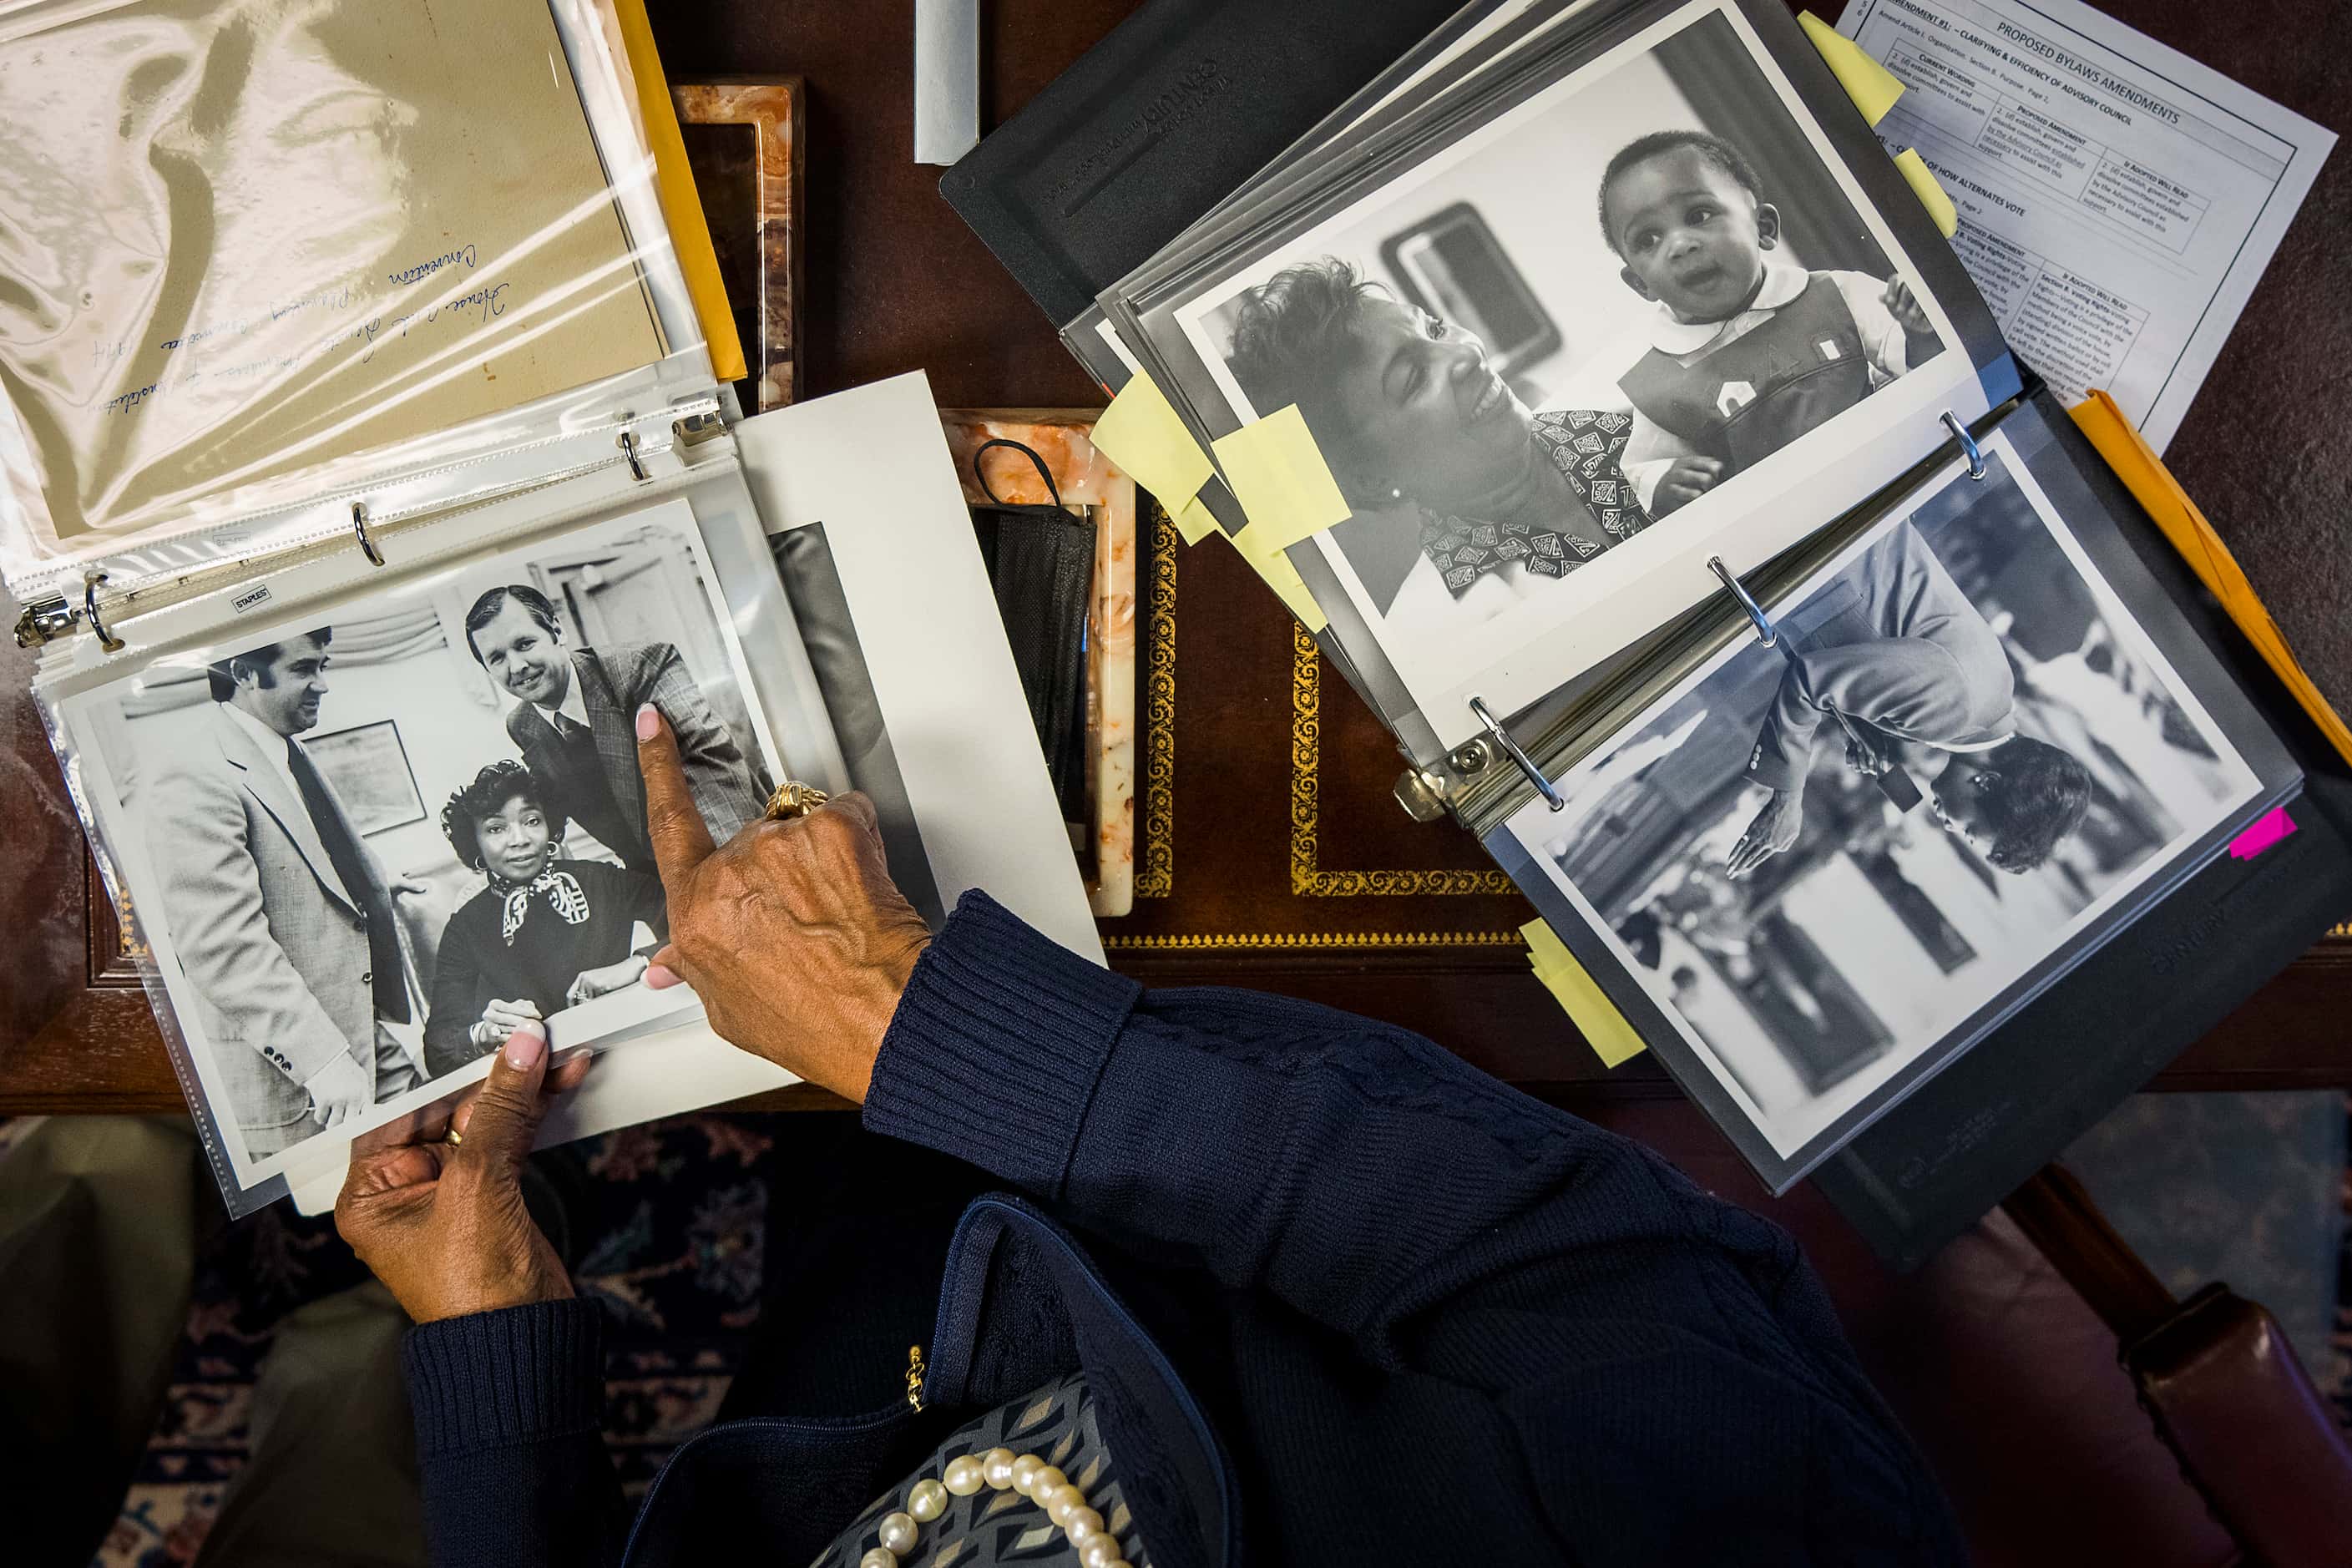 Rep. Eddie Bernice Johnson points out photos in a collection of albums while talking with...